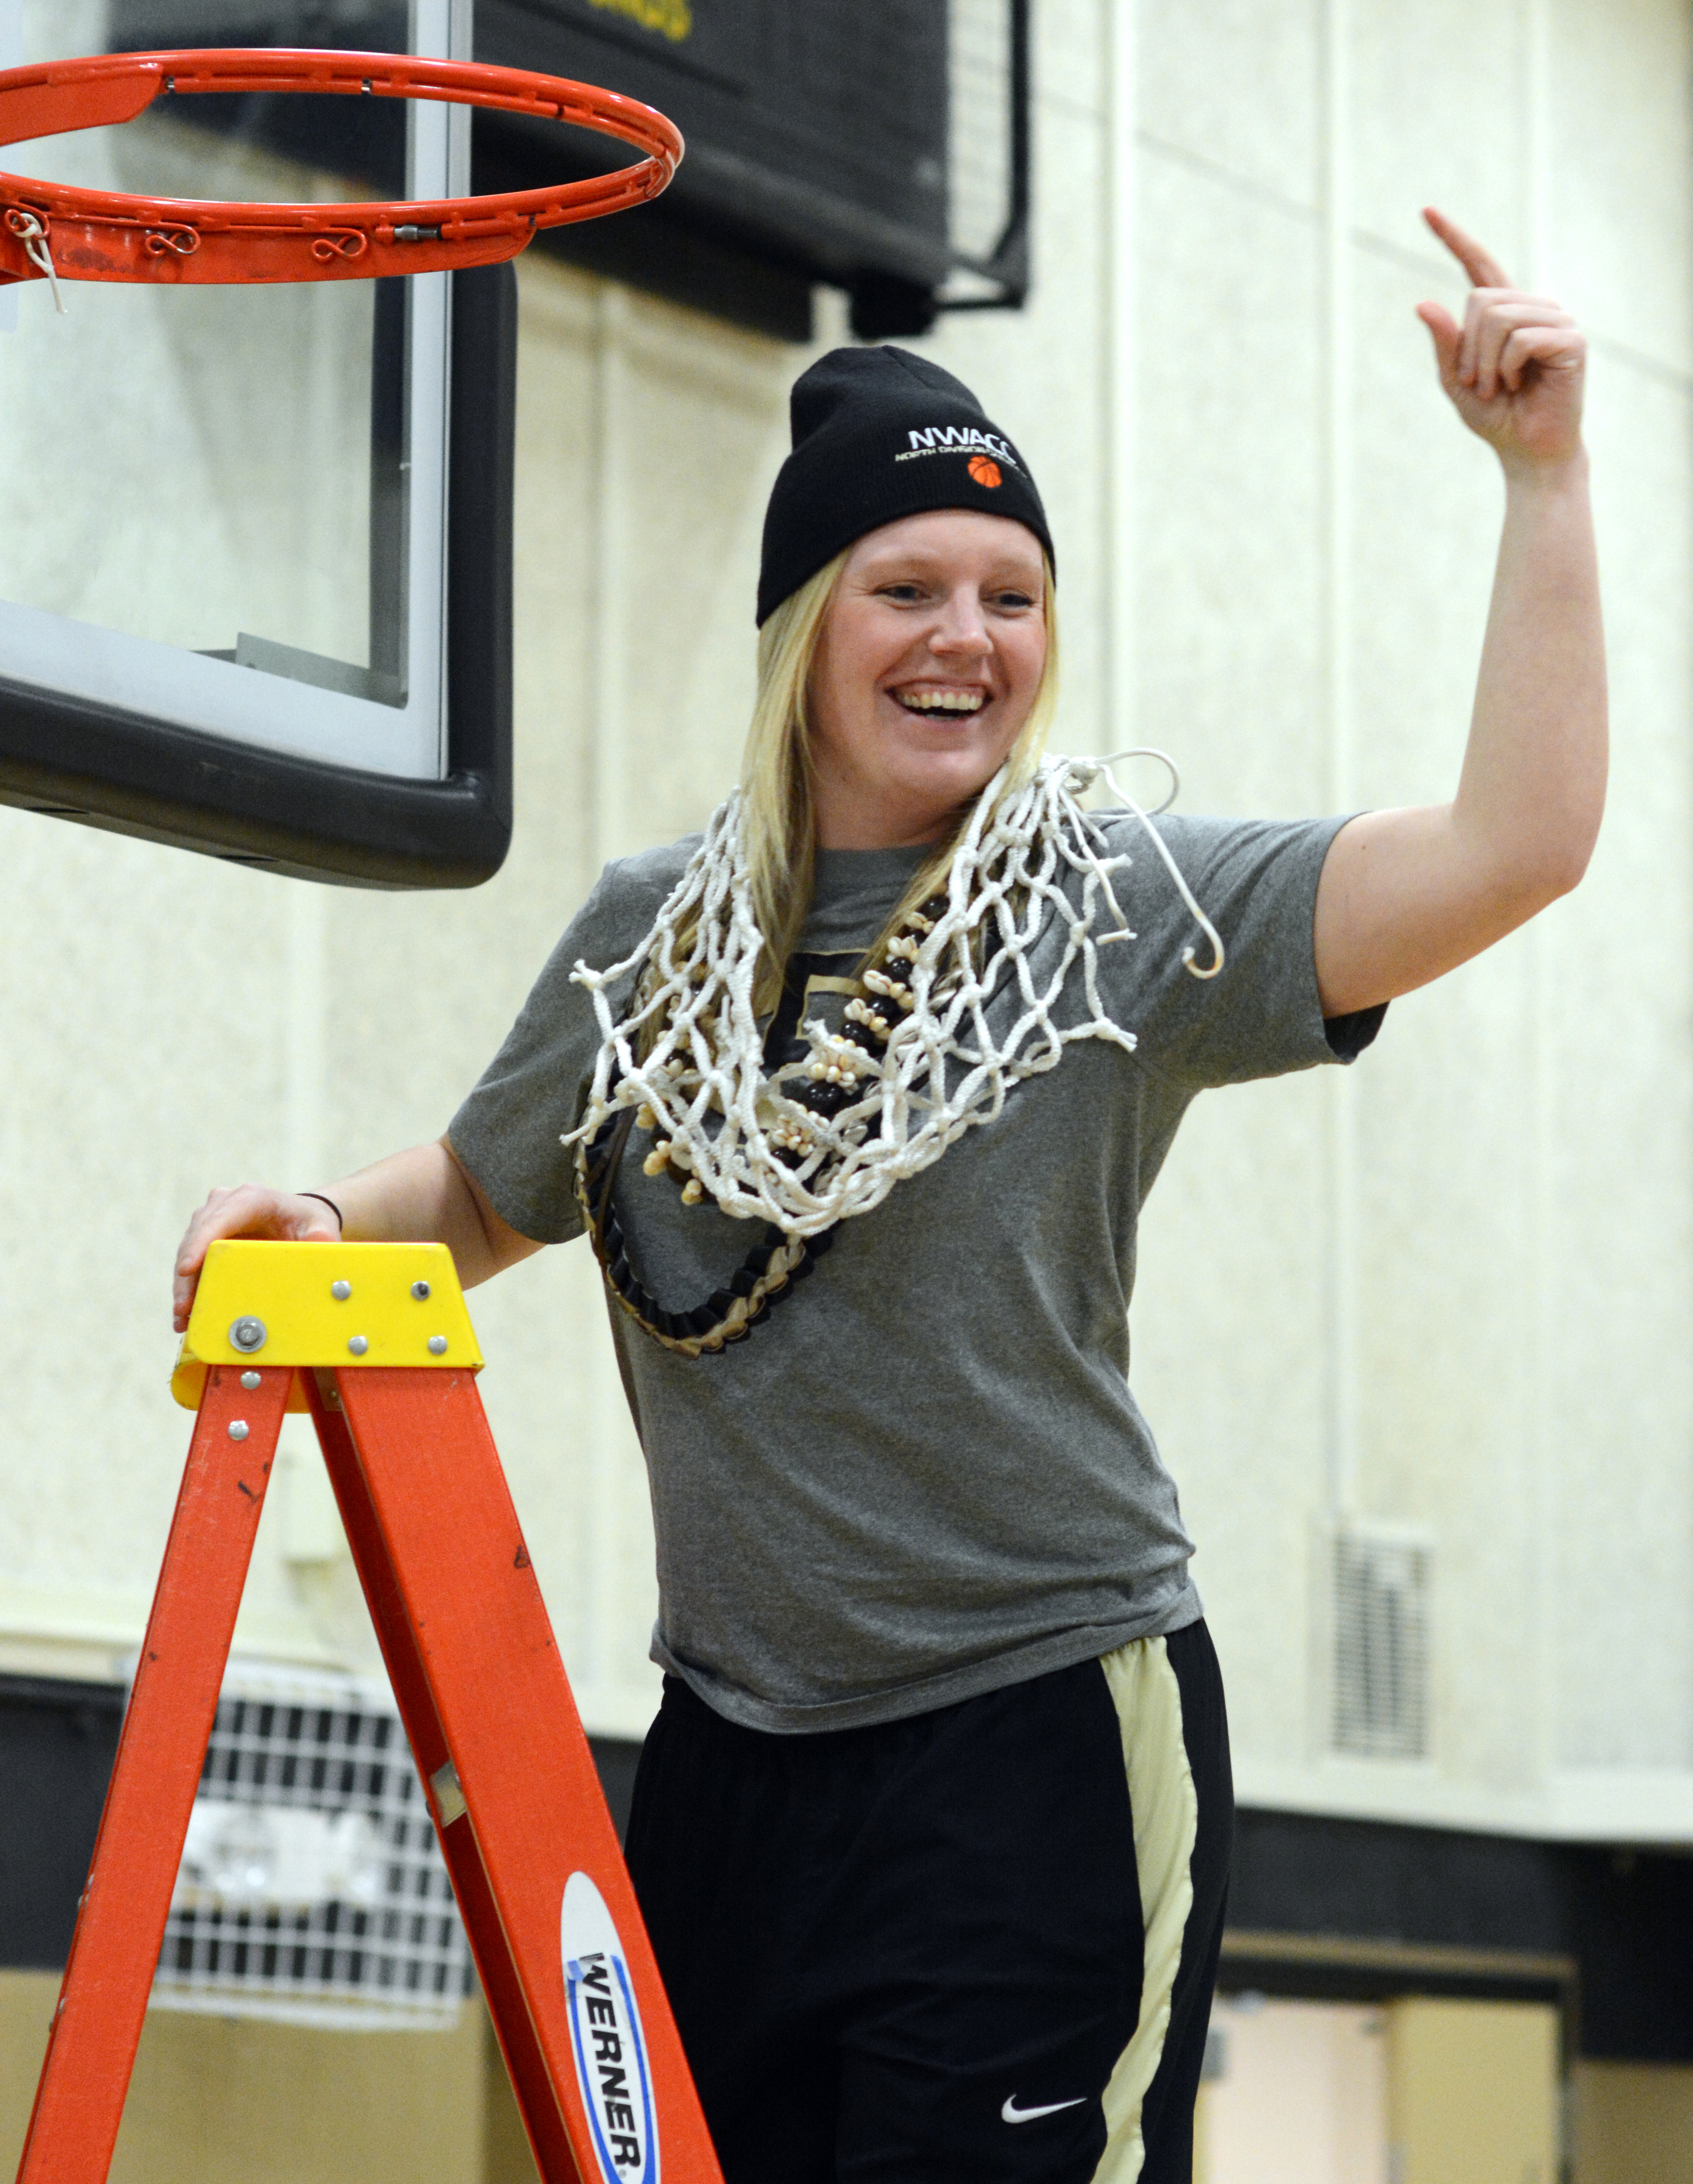 Peninsula College coach Alison Crumb celebrates after cutting down the net after the Pirates won the NWAC North Region championship. (Rick Ross)